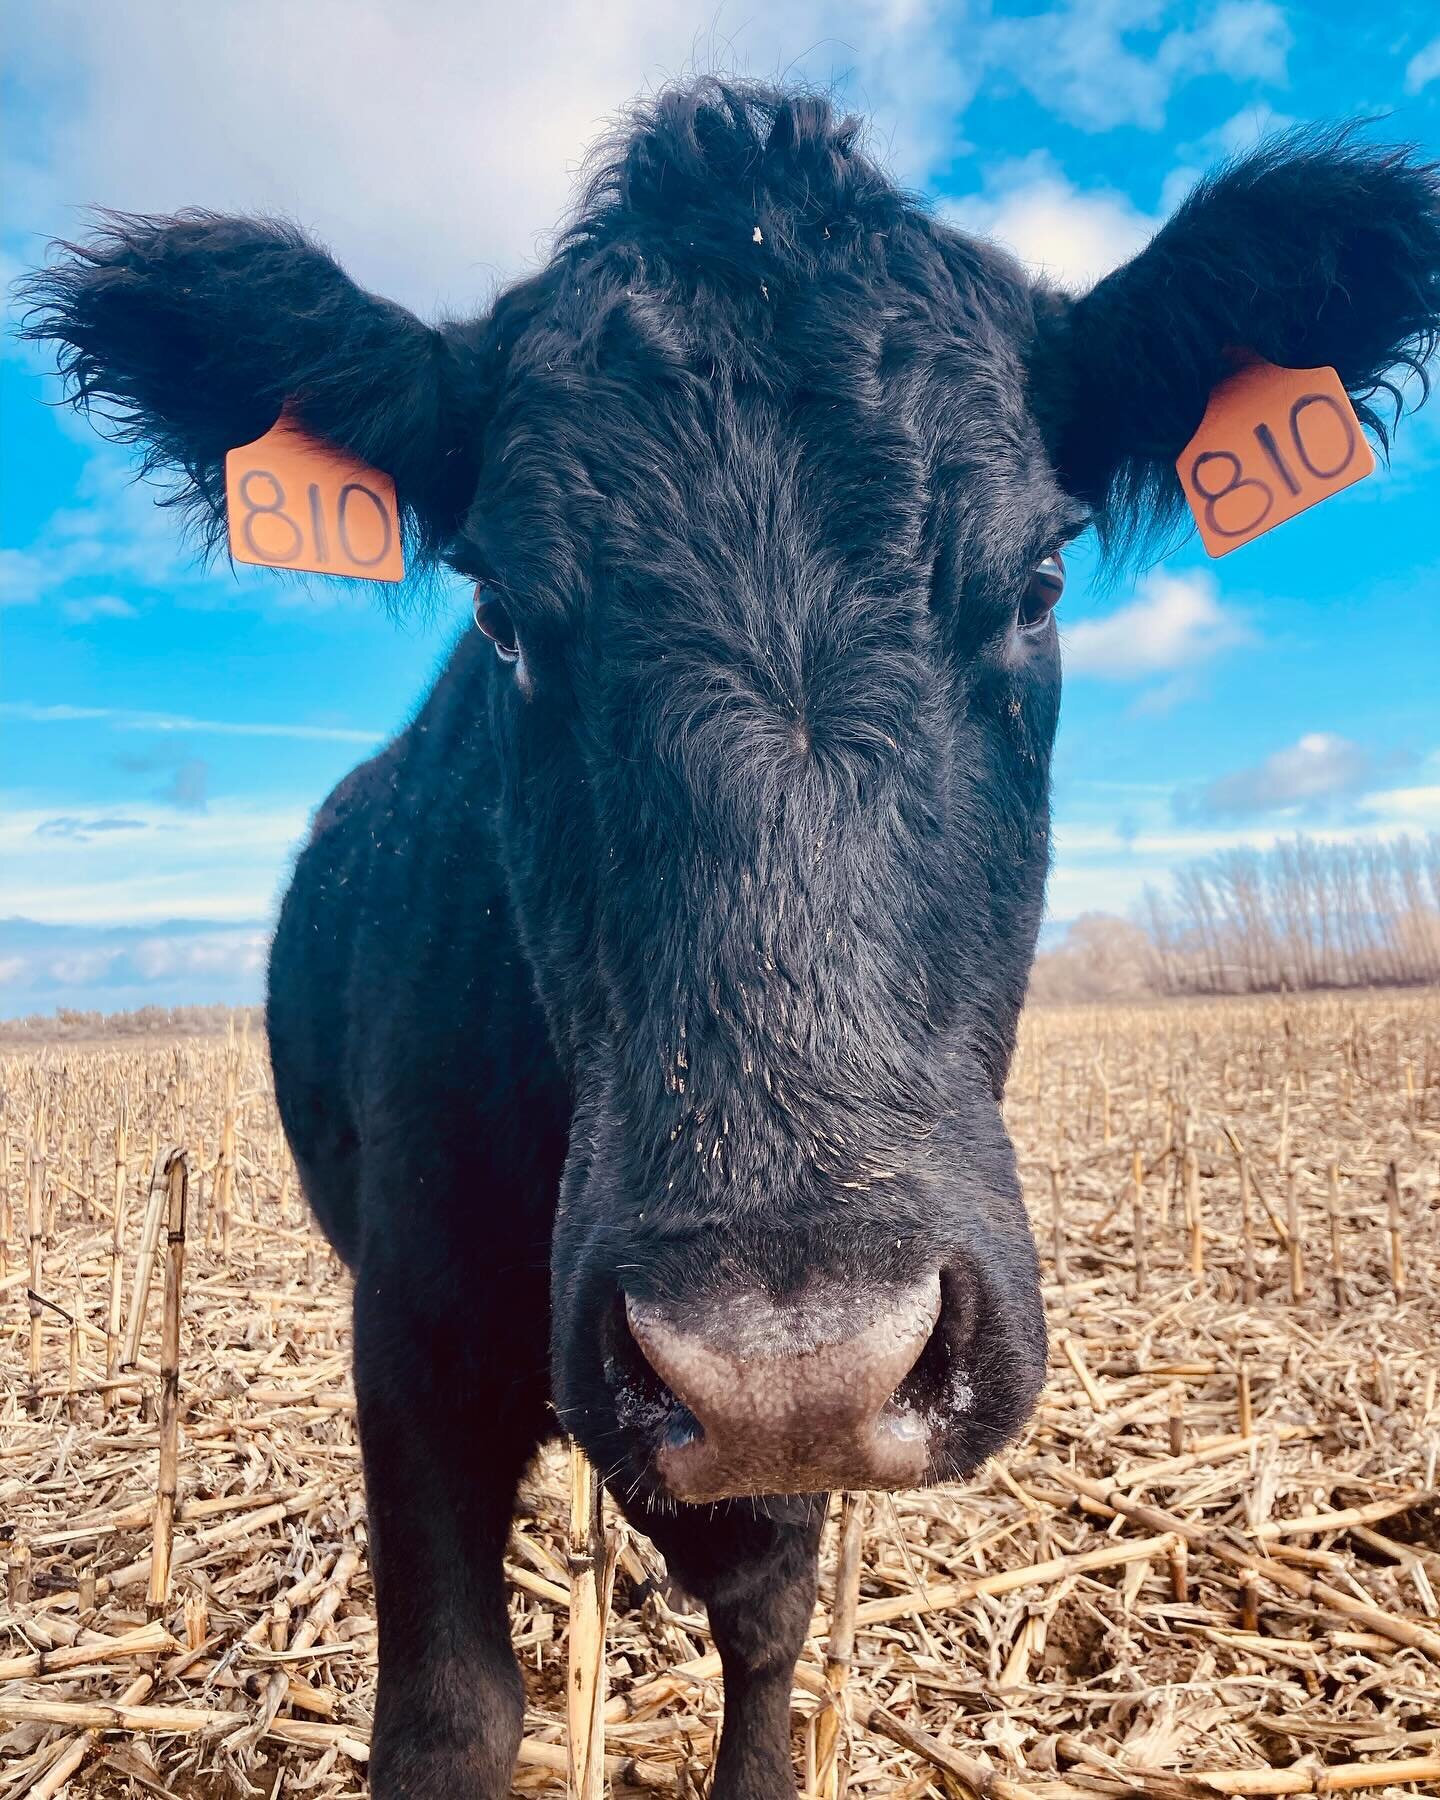 It&rsquo;s calving season! And while it&rsquo;s our most important job to allow these mommas to do their thing, it&rsquo;s just as important for us to help them along. A few things that we&rsquo;ve found helpful to a successful calving season&hellip;